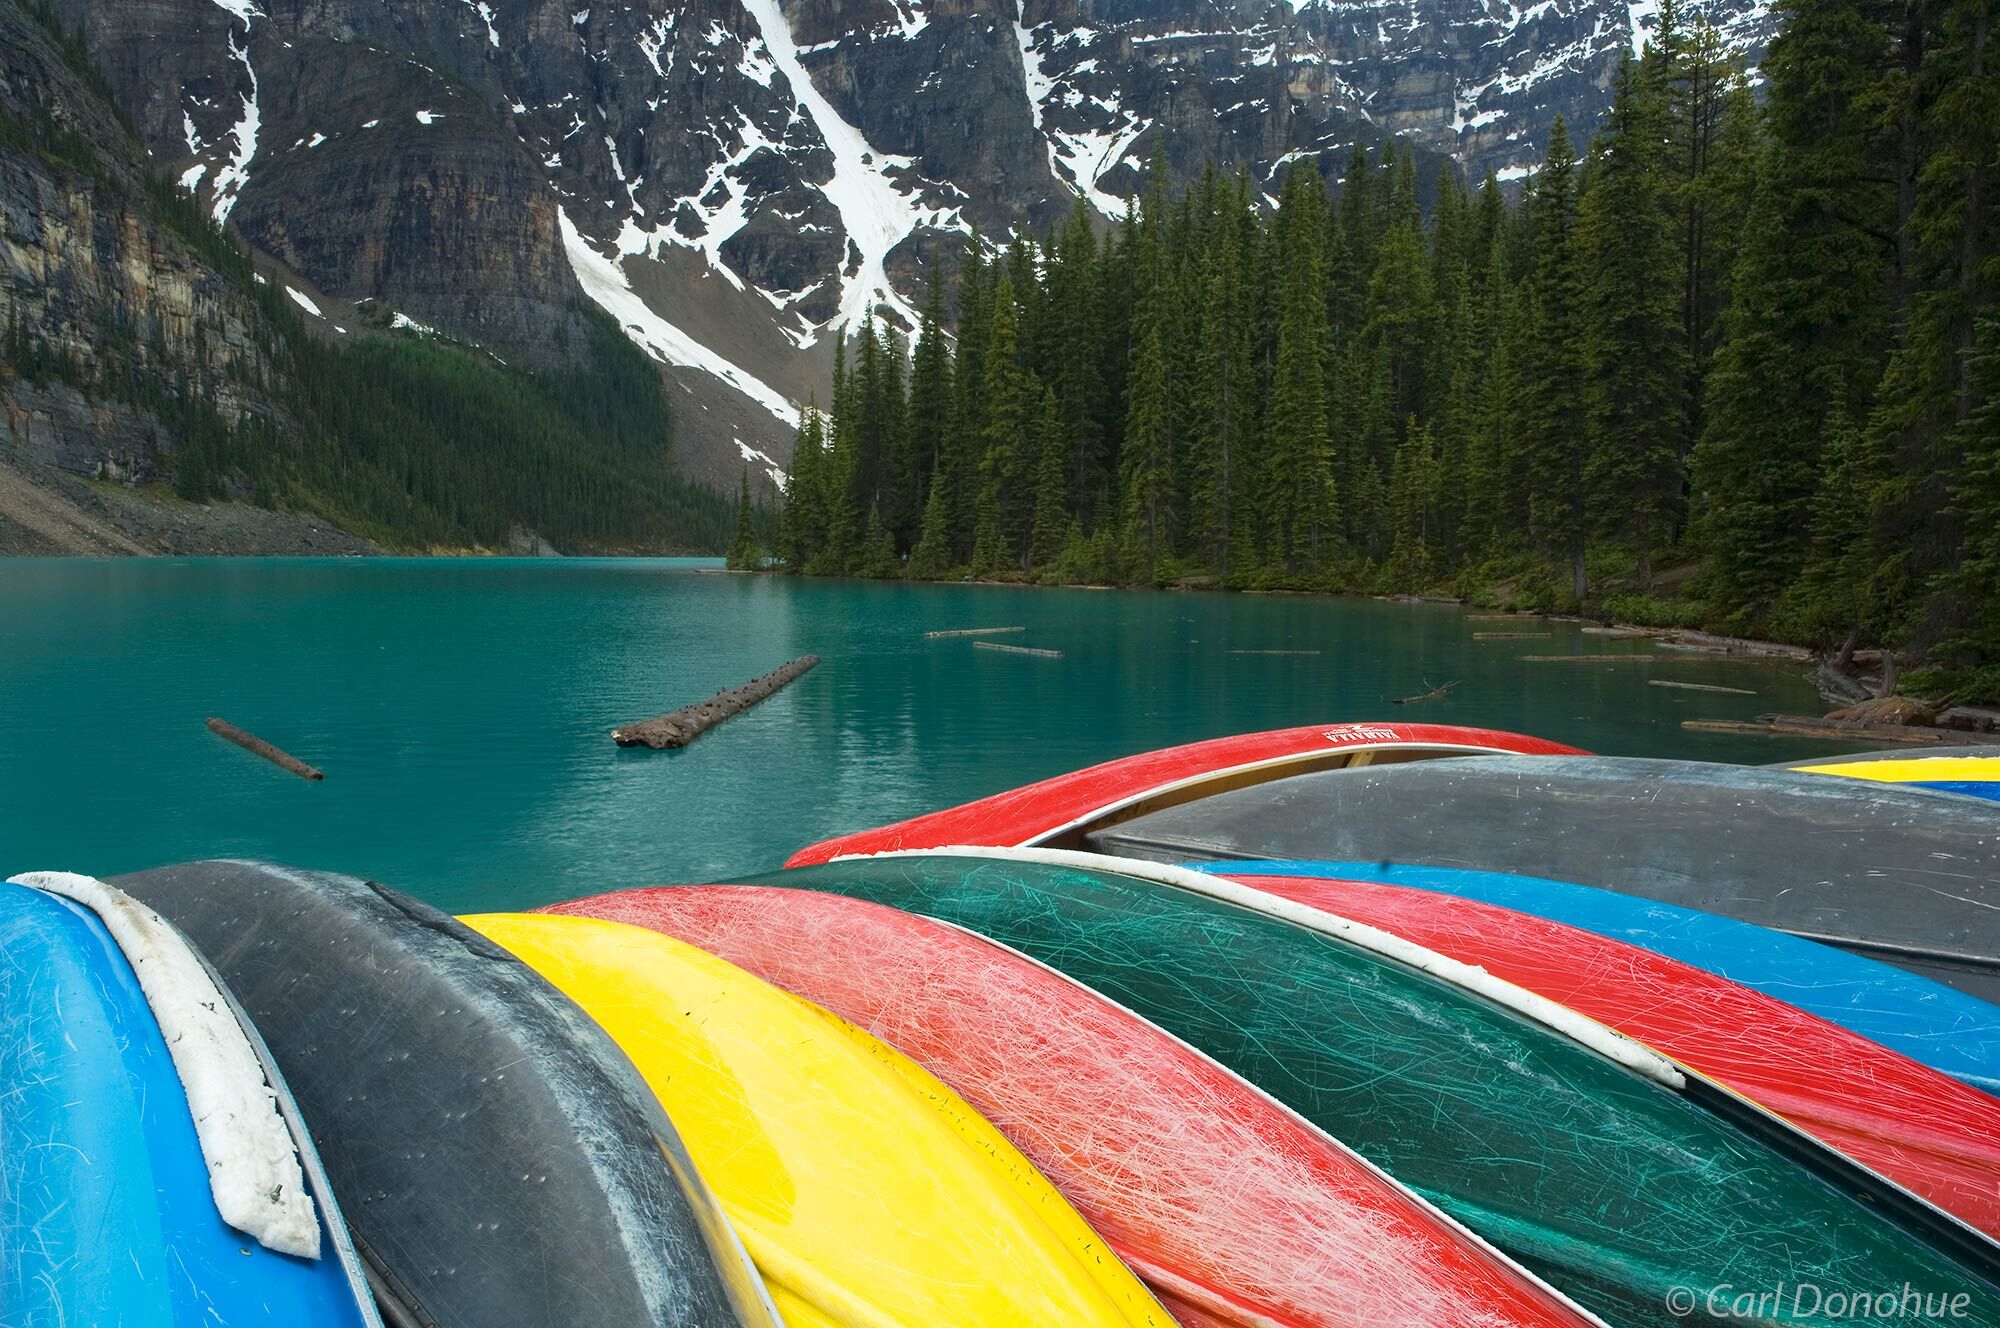 A colorful array of canoes lined up on the boat deck at Moraine Lake, Banff National Park, Alberta, Canada.